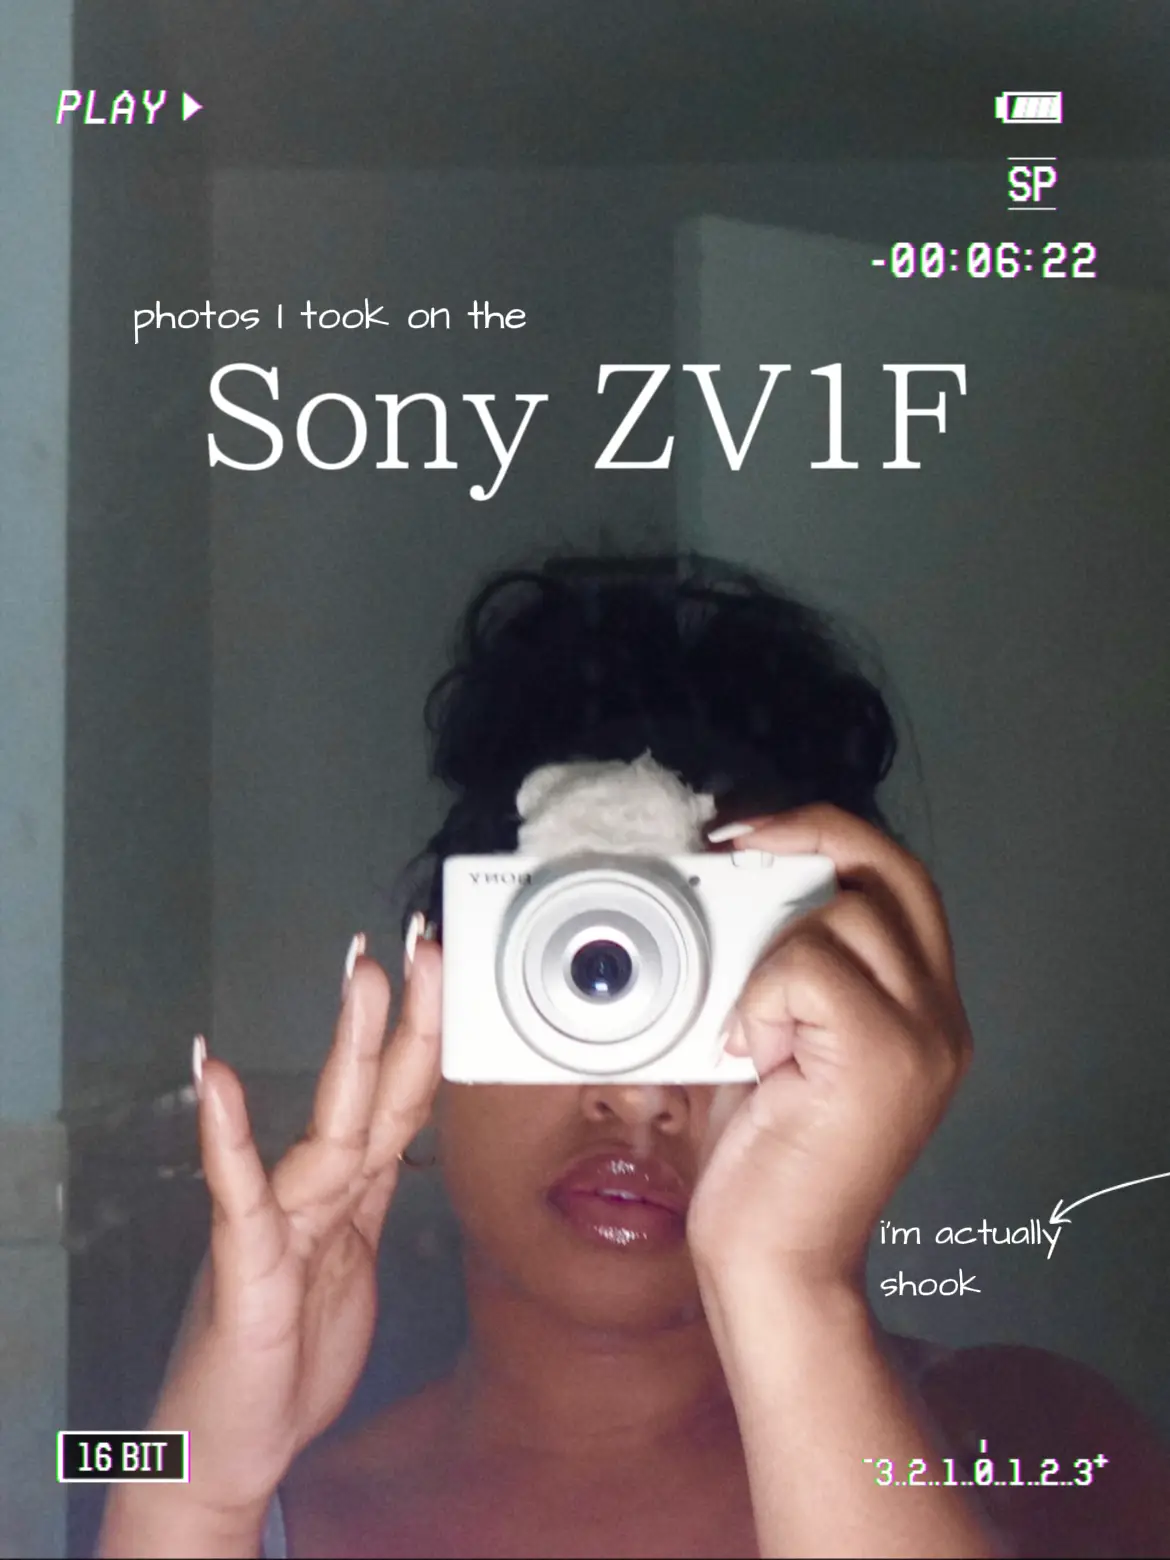 That 90s Look w/ The Sony ZV1F 👀📷's images